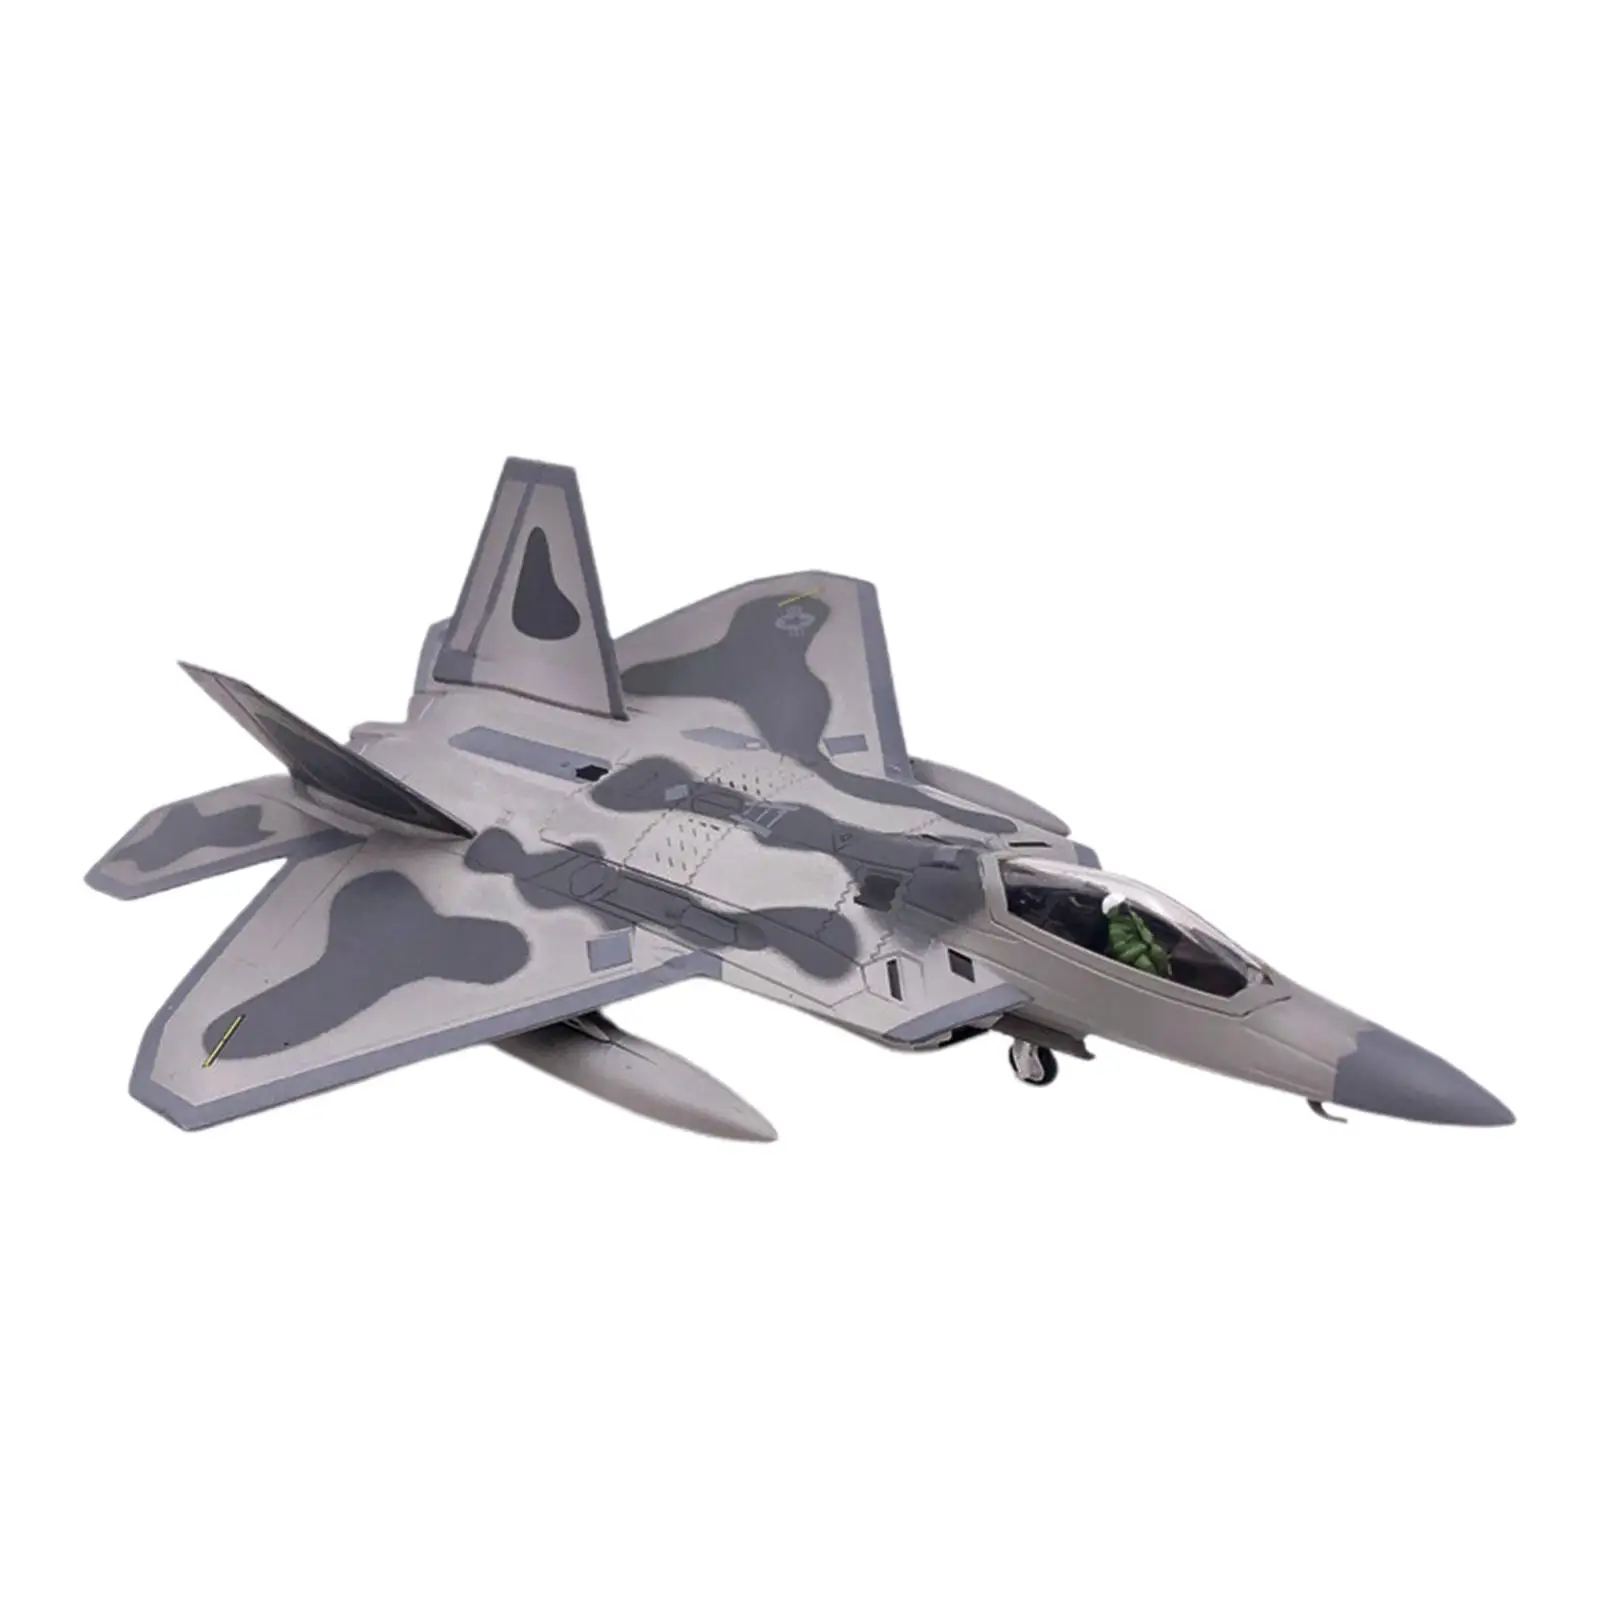 1/100 F22 Fighter Model with Stand Alloy Static Aviation Plane Gift Ornament